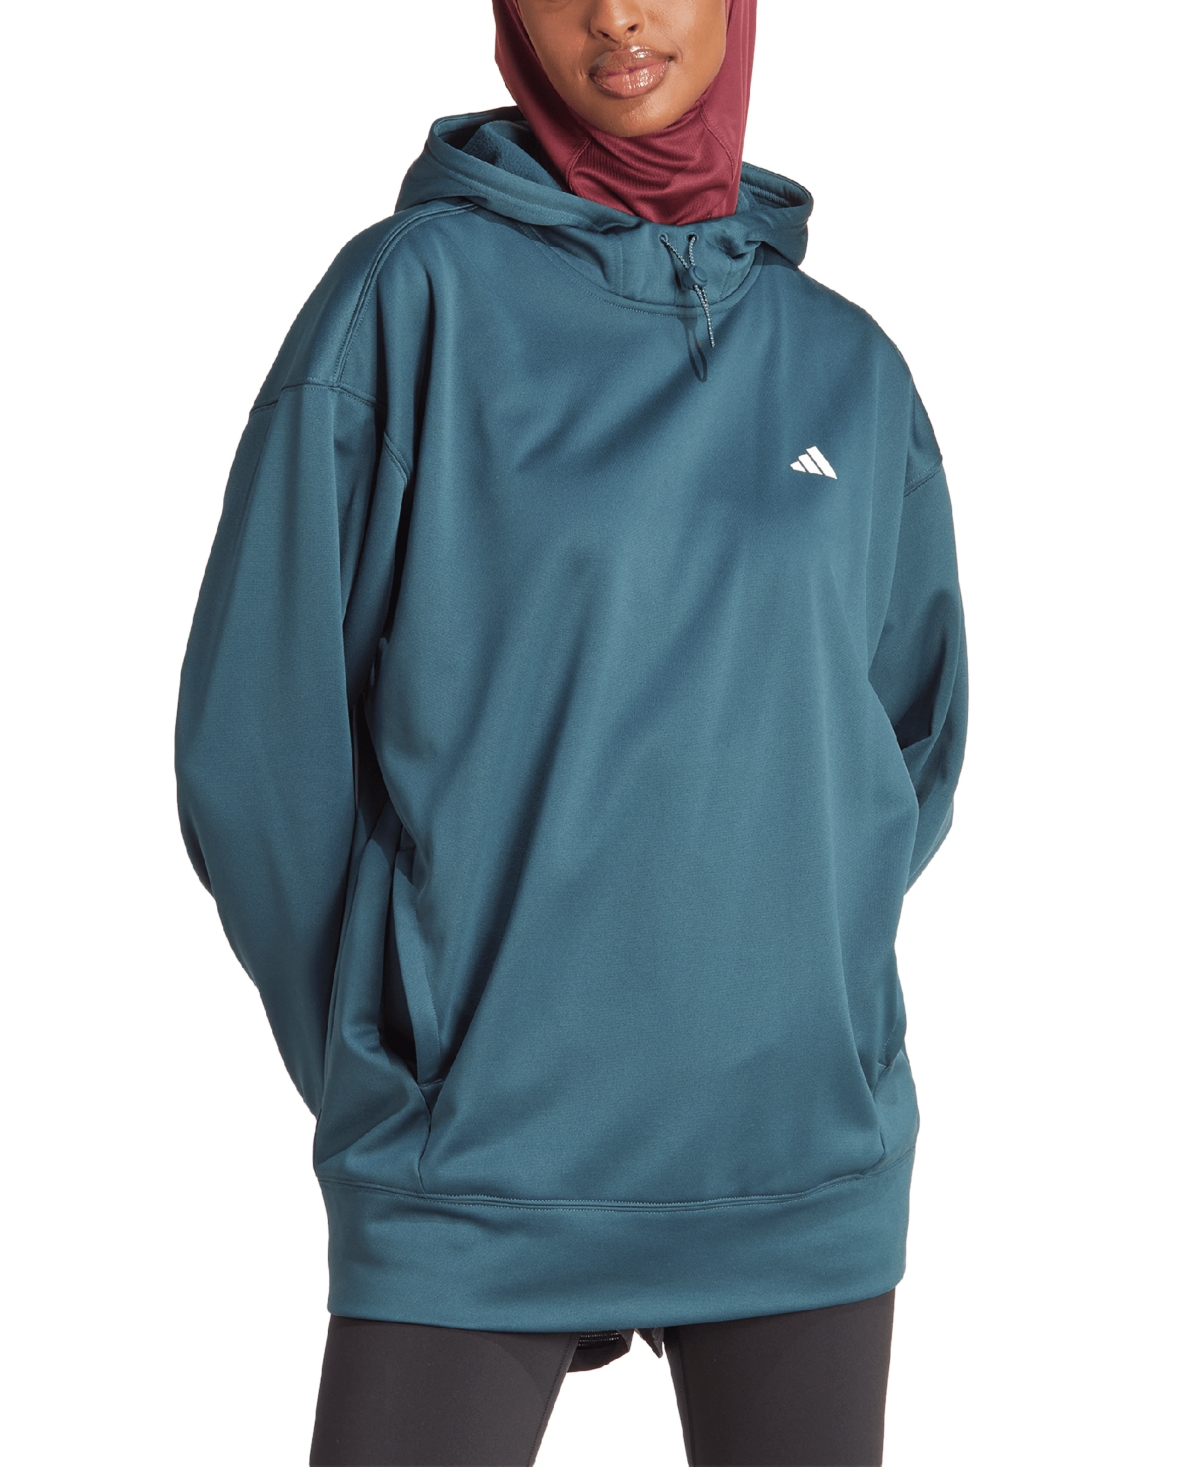 Women's Aeroready Game & Go Dropped-Shoulder Side-Pocket Hoodie - Arctic Night/white